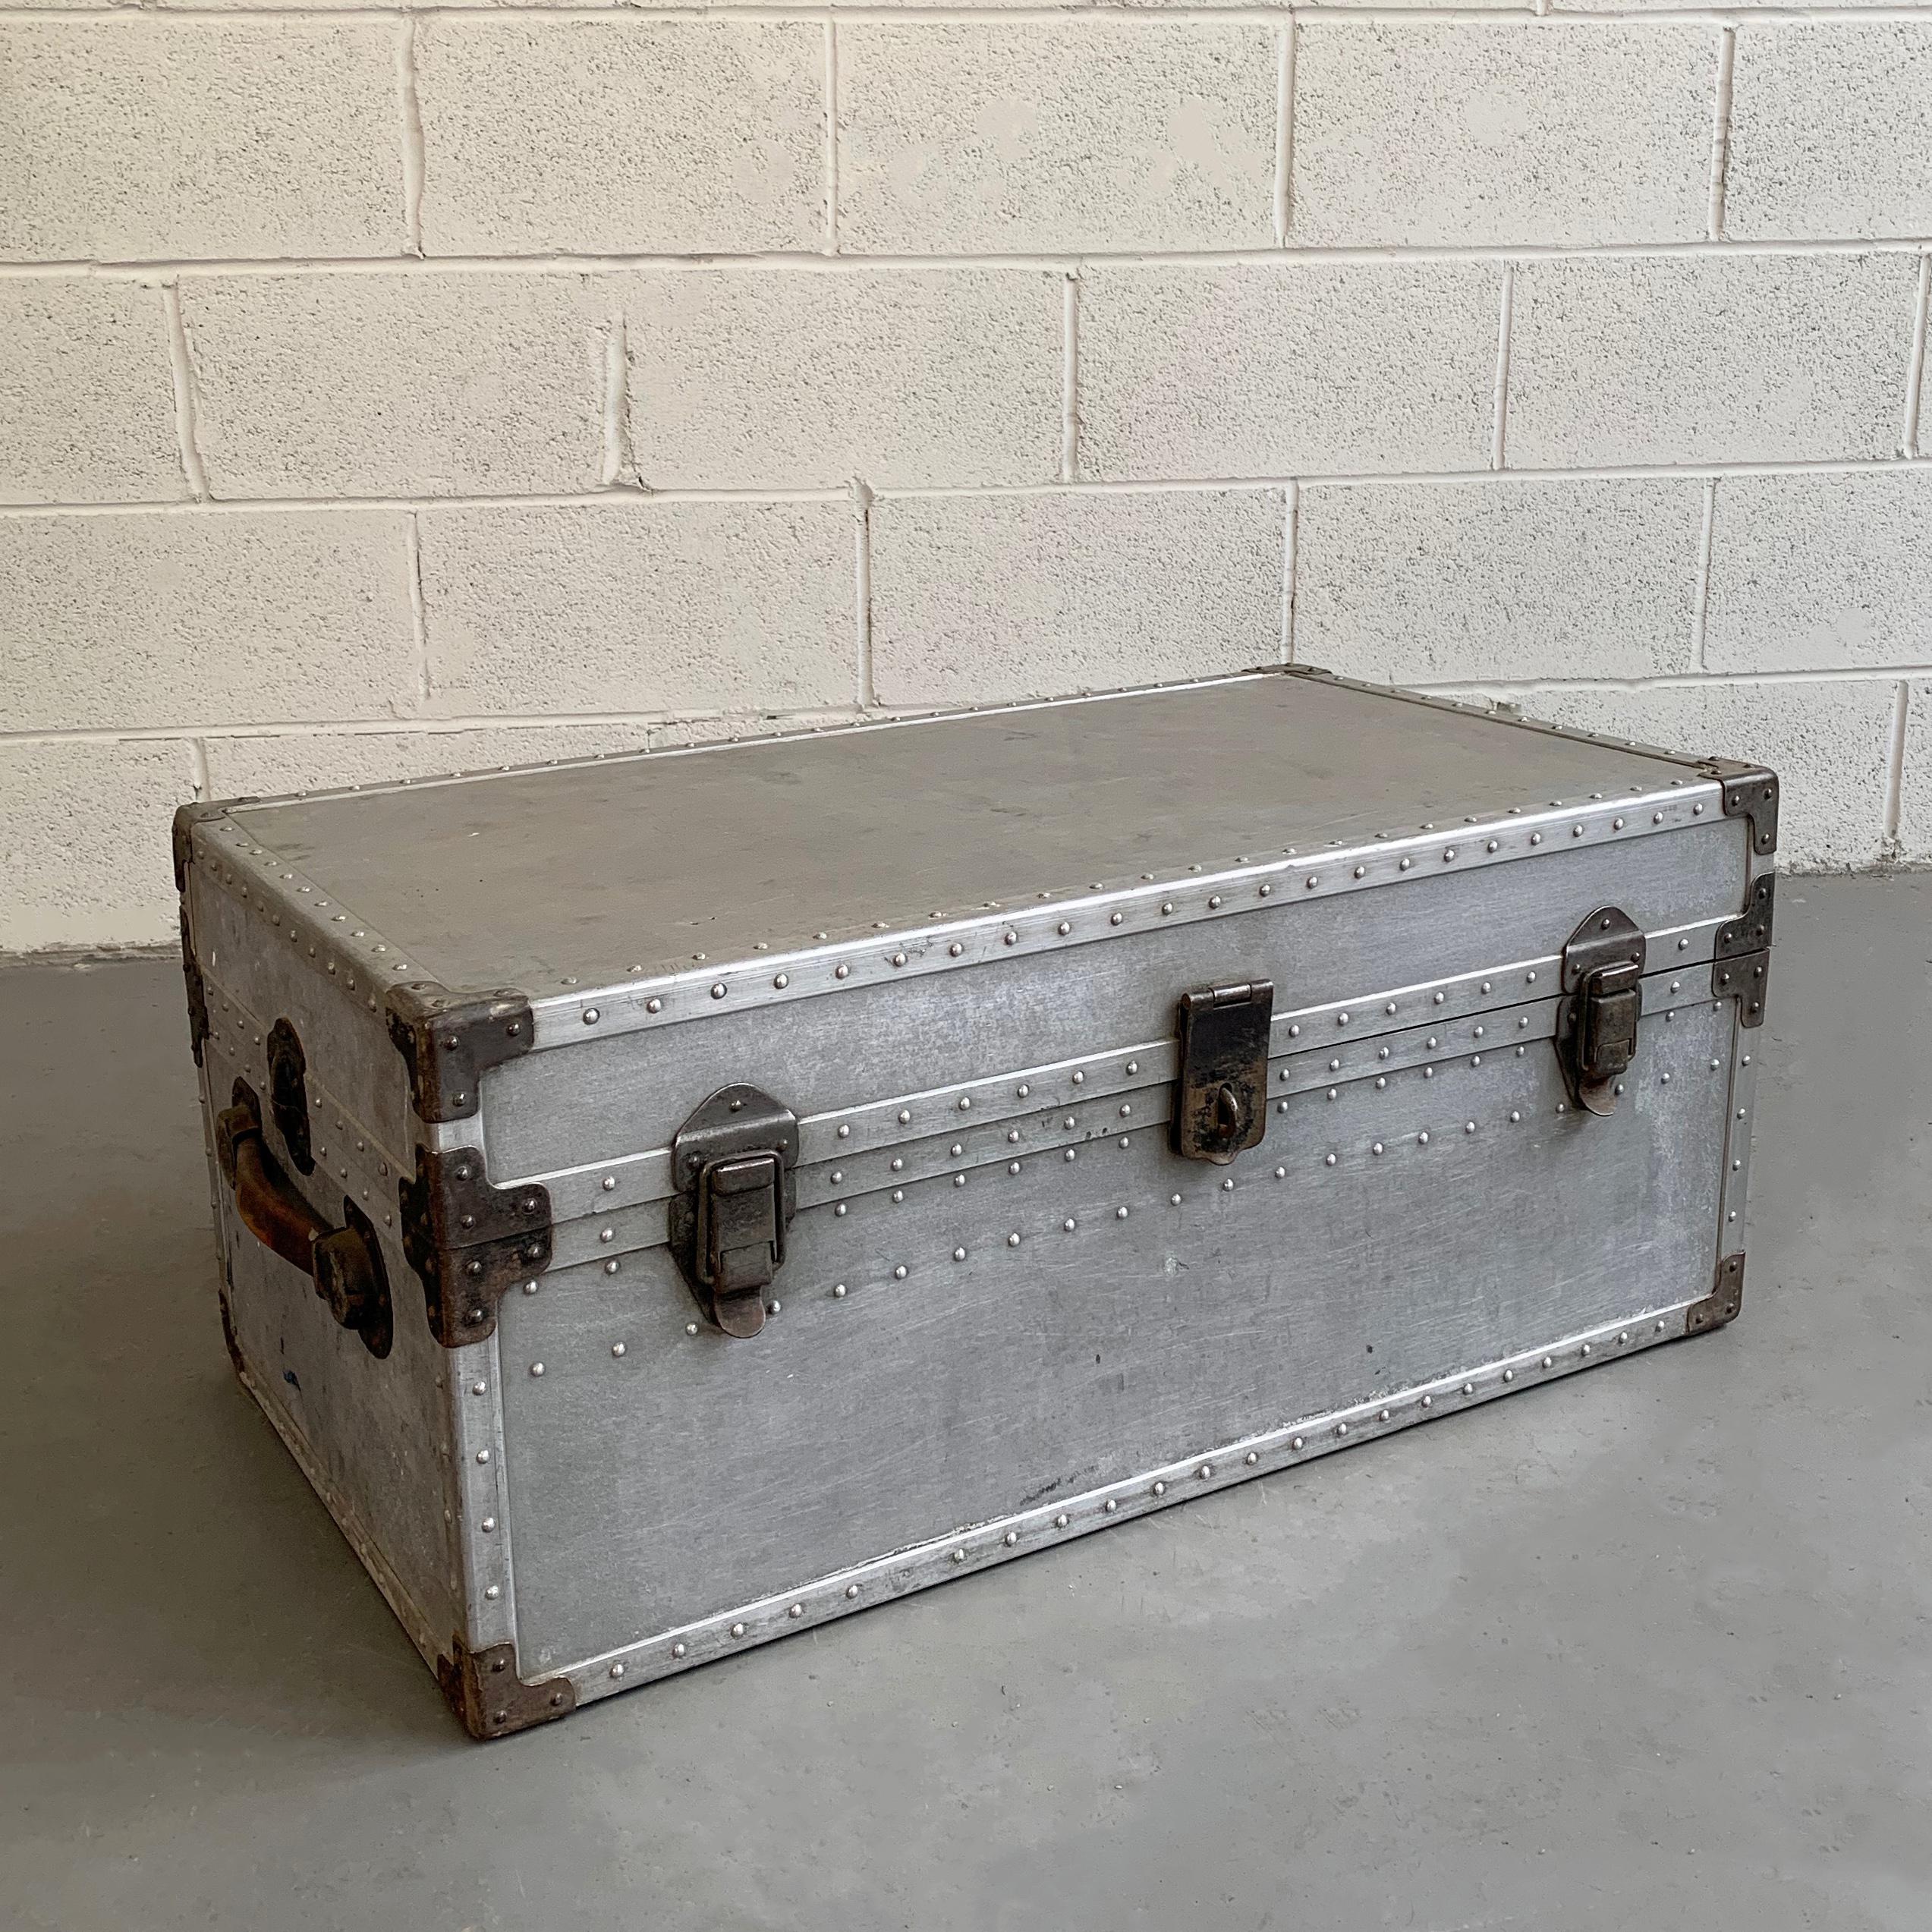 Industrial, aluminum, military trunk features riveted edges, leather handles, and its original green painted interior with tray insert. Two other same size trunks are available with some condition issues.